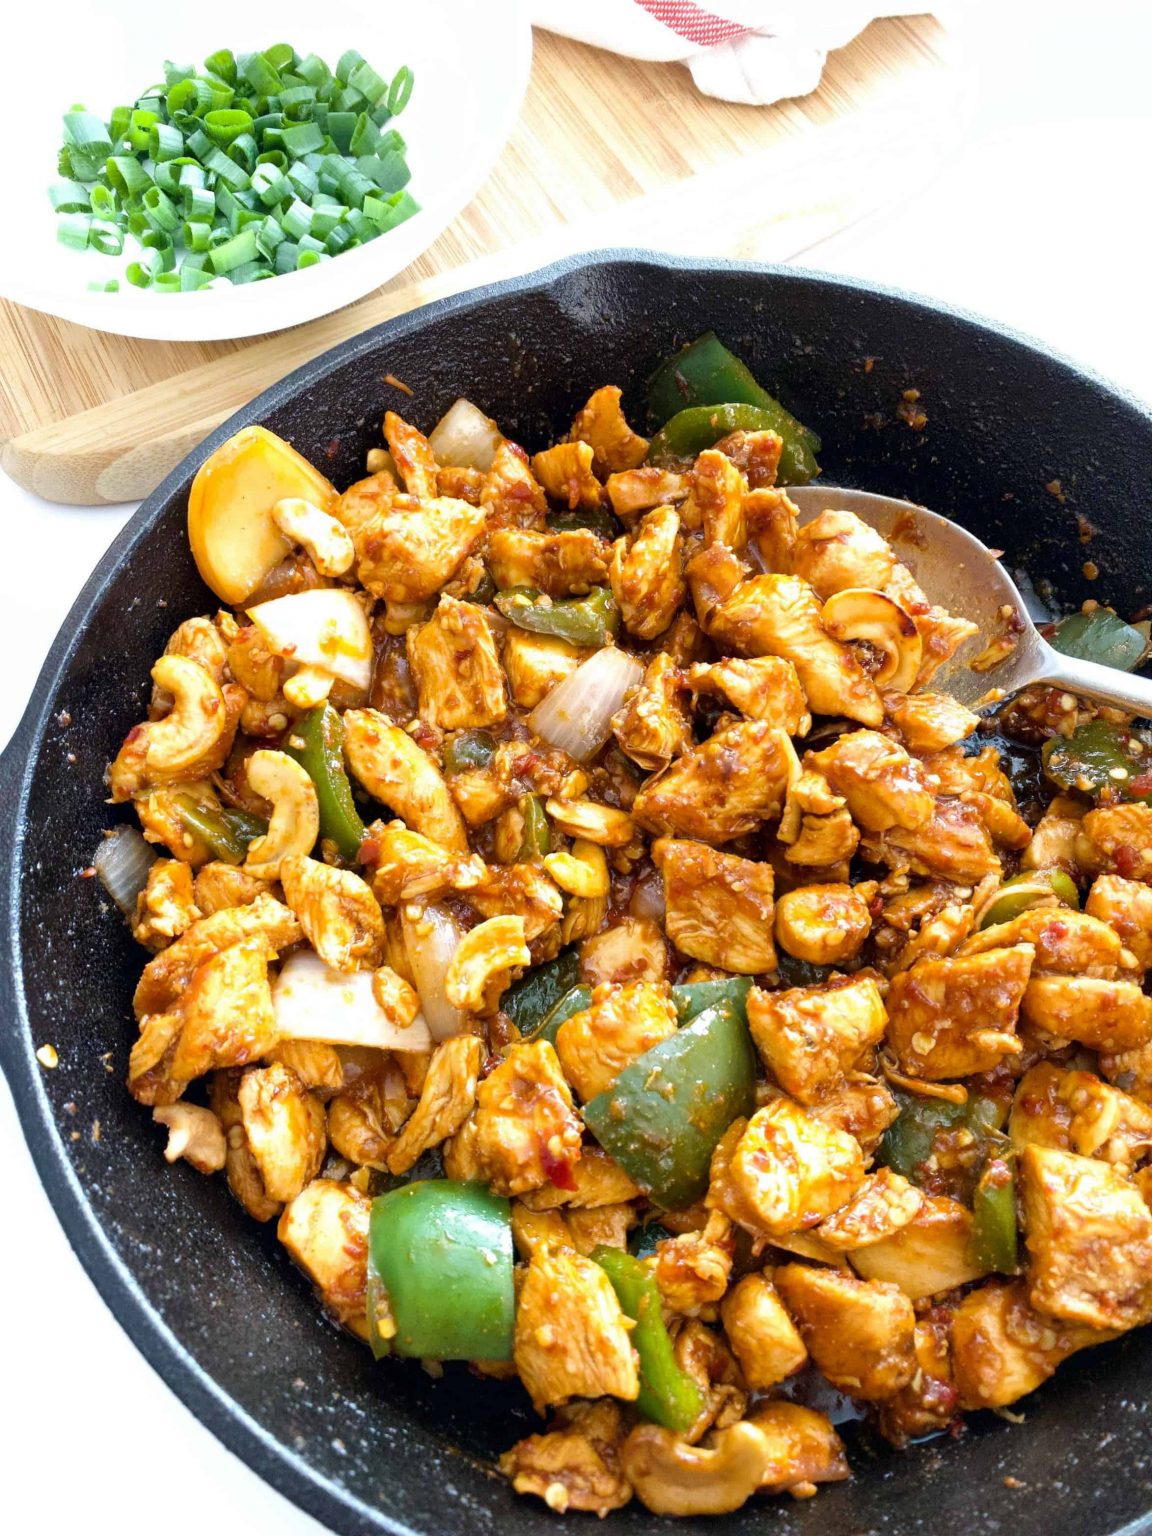 Low-carb Keto Cashew Chicken